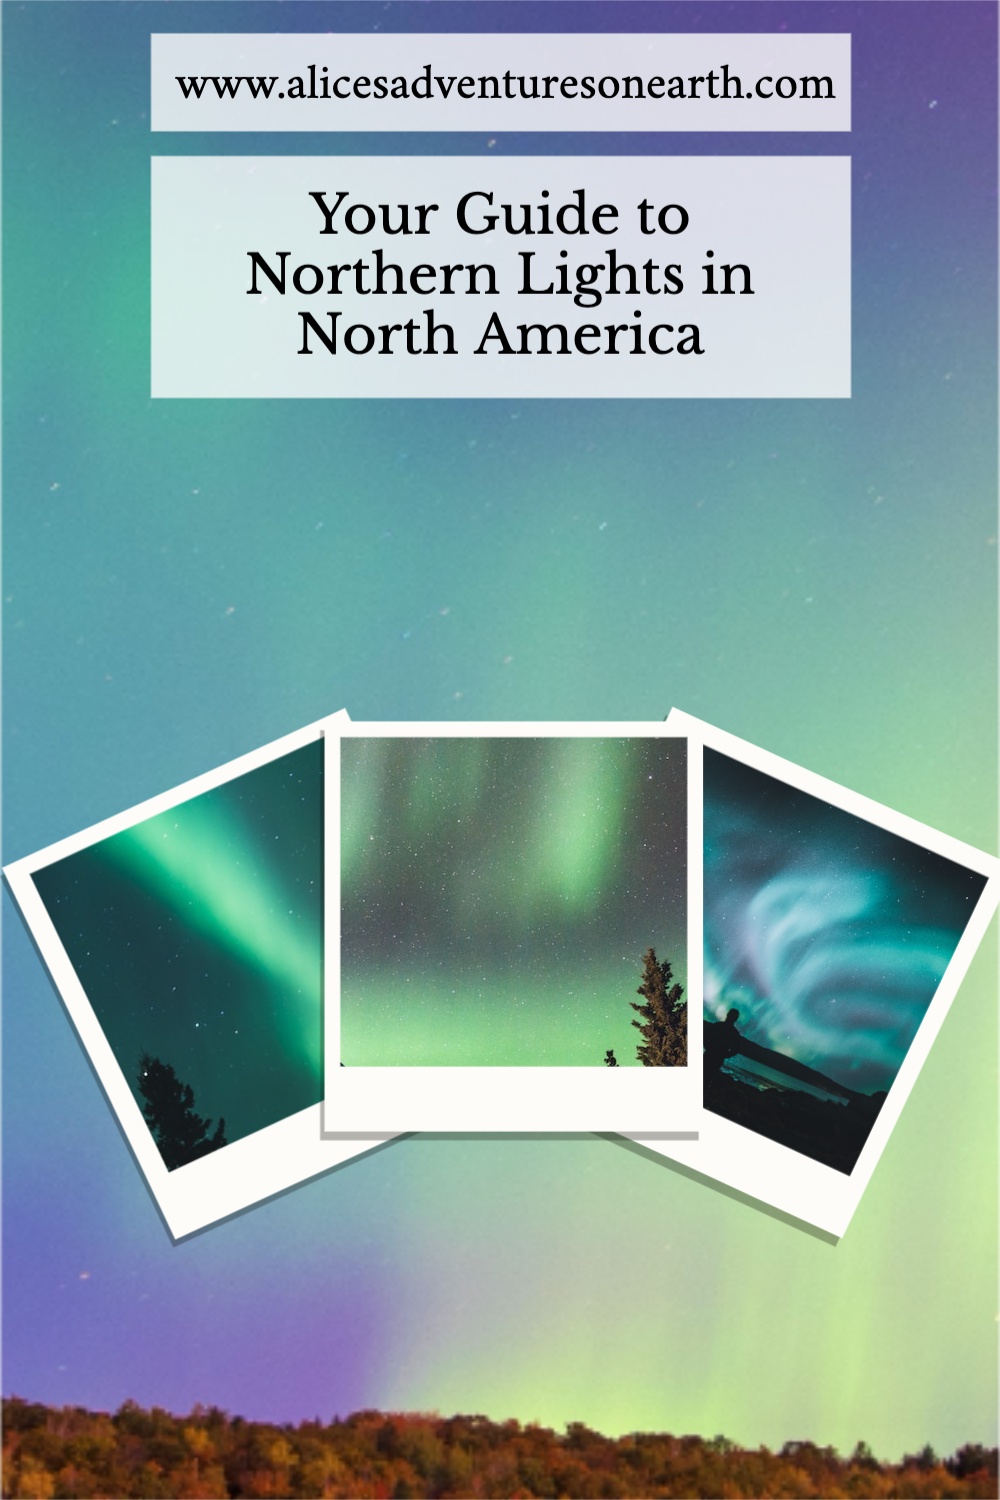 North America has some fantastic places to see the Northern lights. In this guide we cover some of the best places from the stunning Canadian Rockies, to Alaska. #northernlights 